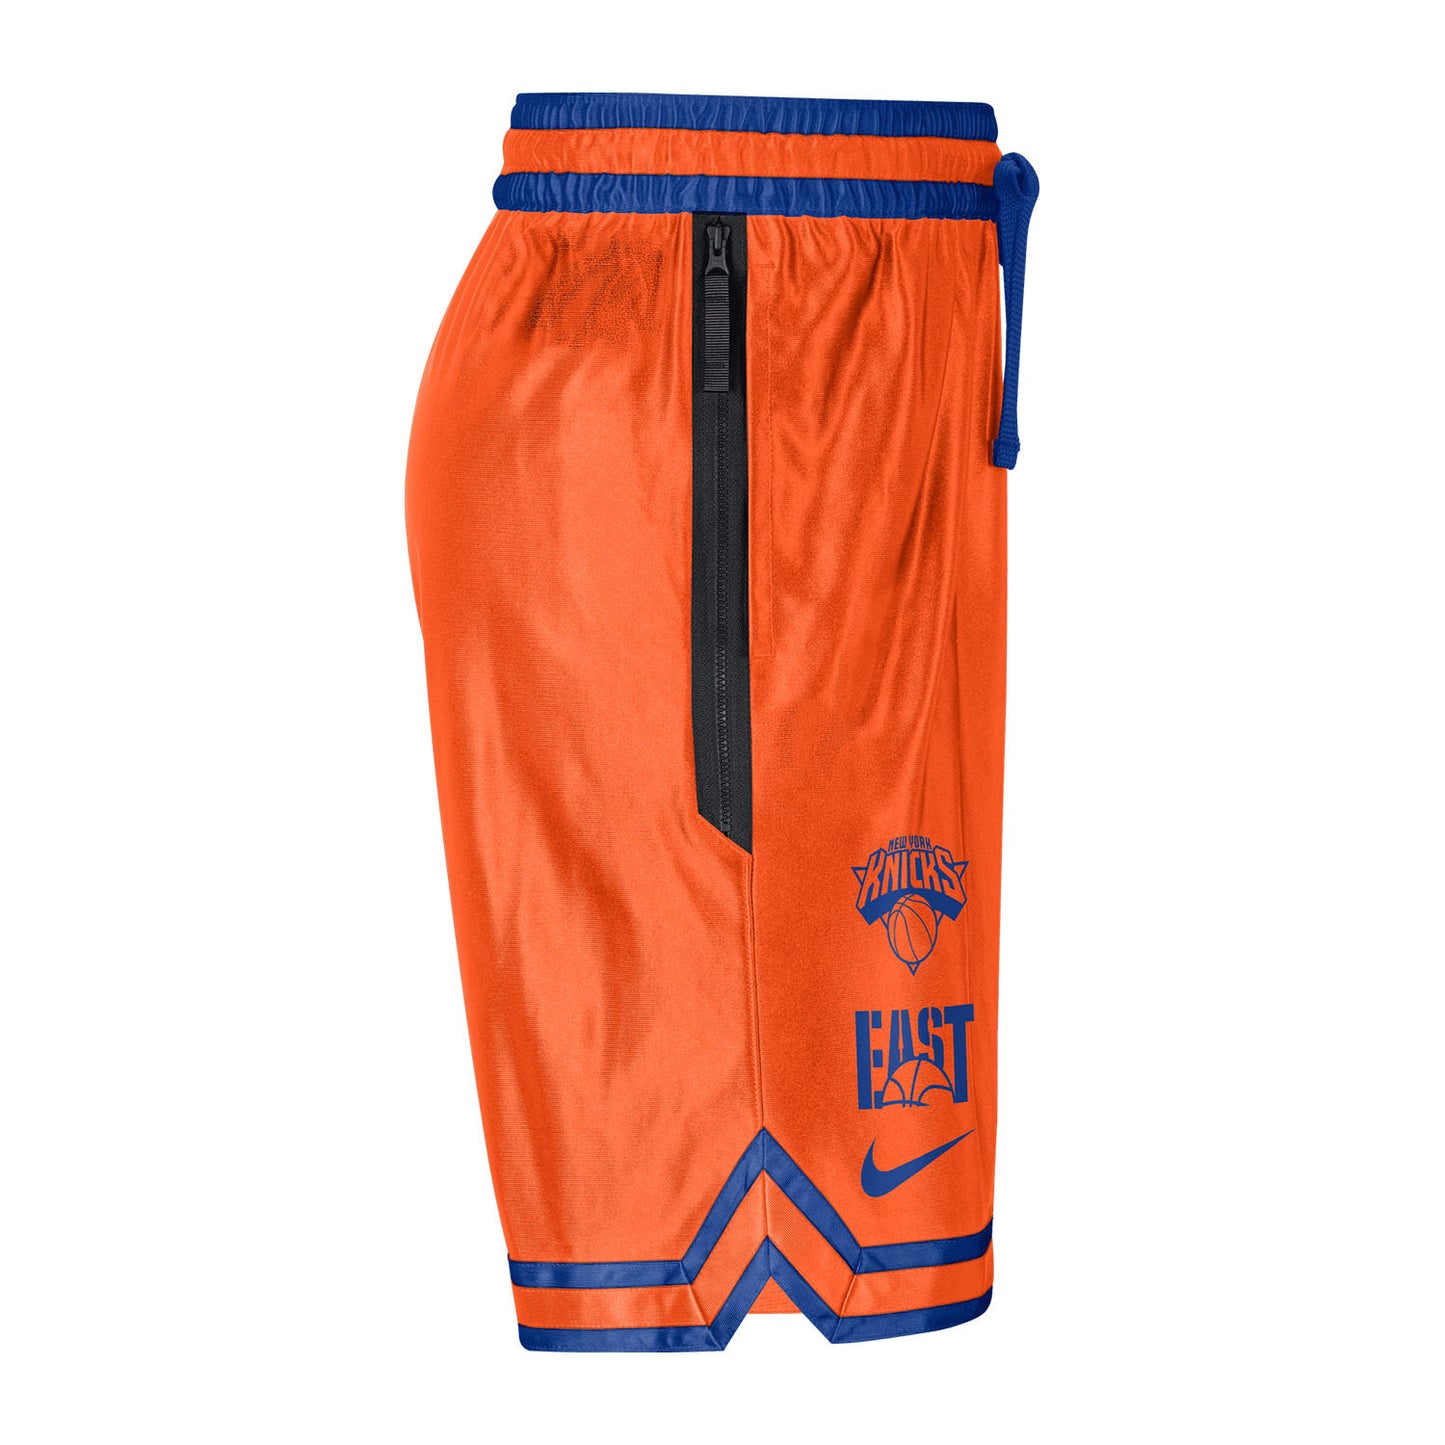 Nike Knicks Dri-fit Courtside DNA Shorts in Orange and Blue - Side View